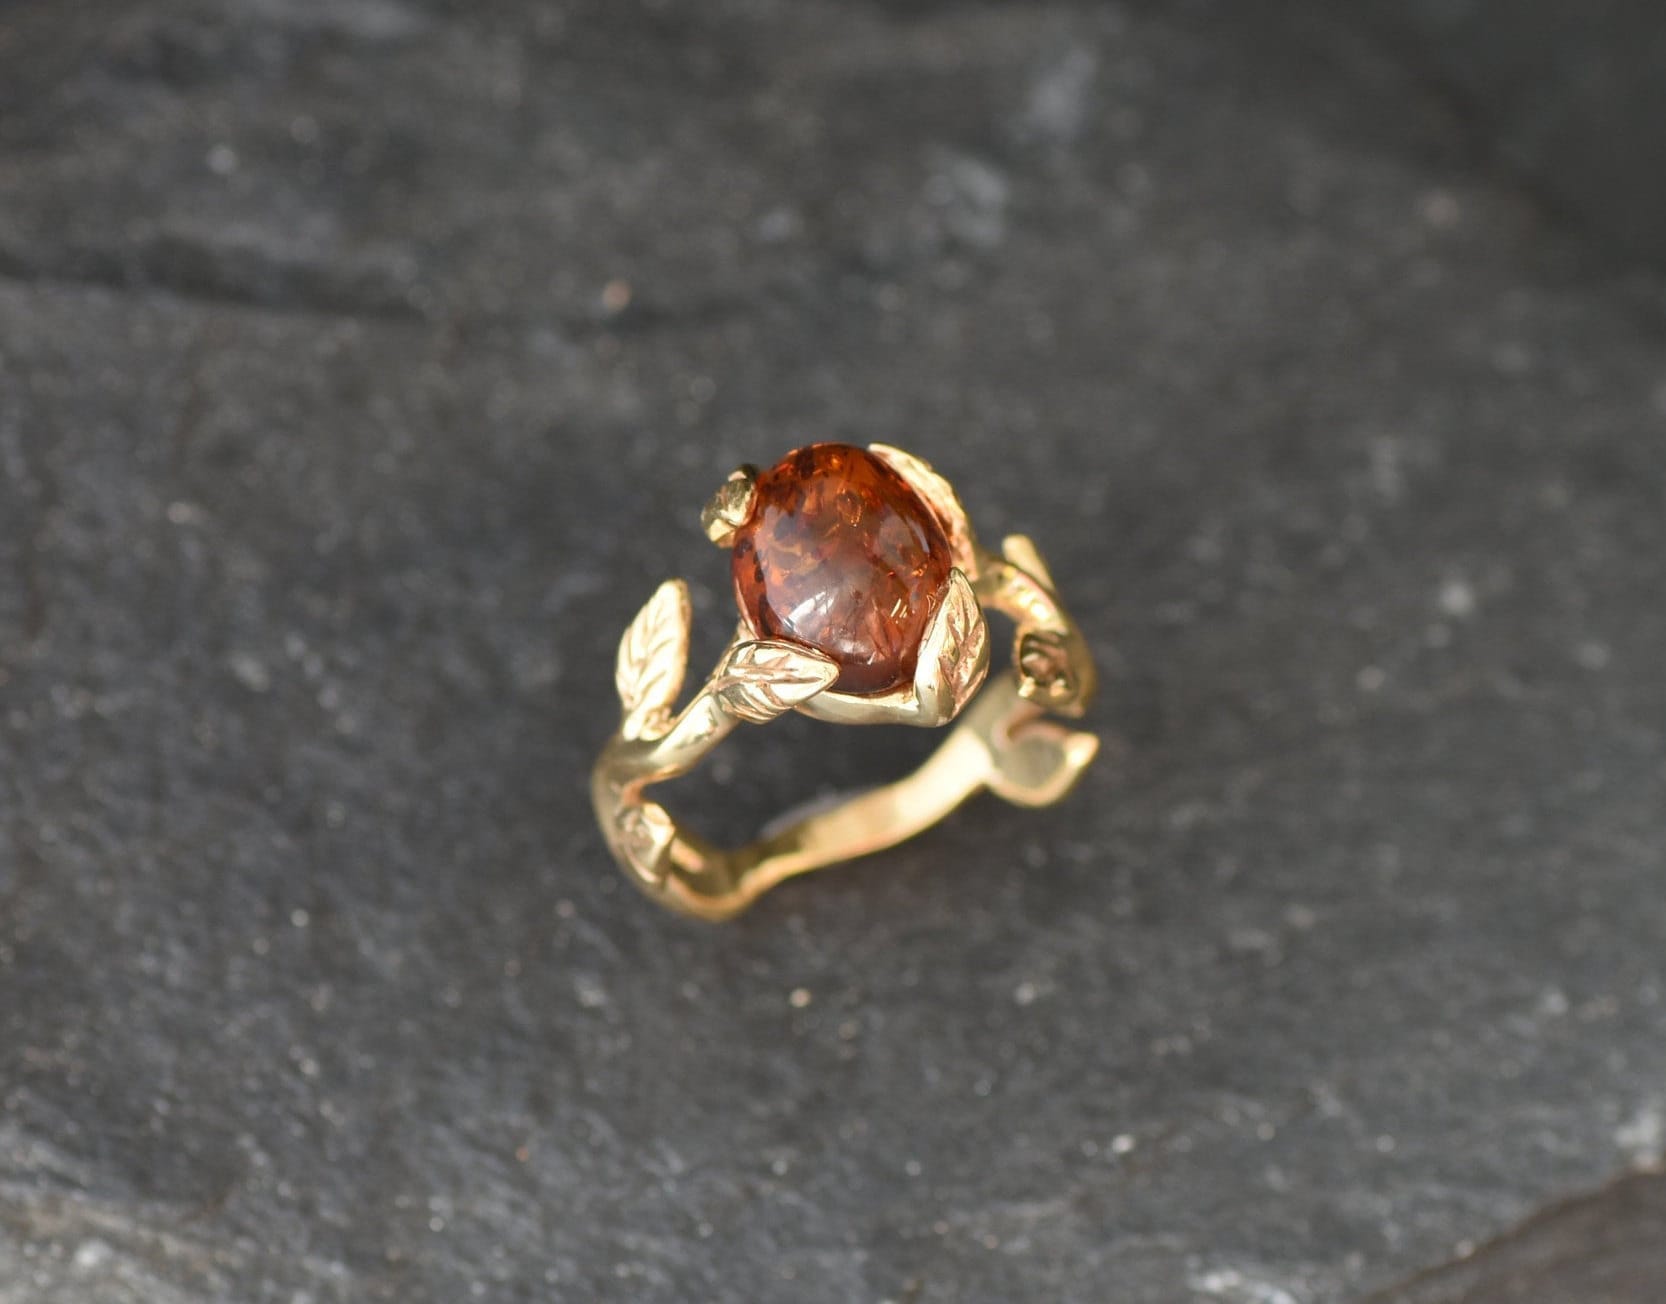 Gold Amber Ring, Natural Amber, Gold Leaf Ring, Branch Ring, Vintage Ring, Gold Plated Ring, Amber Ring, Proposal Ring, Gold Vermeil Ring